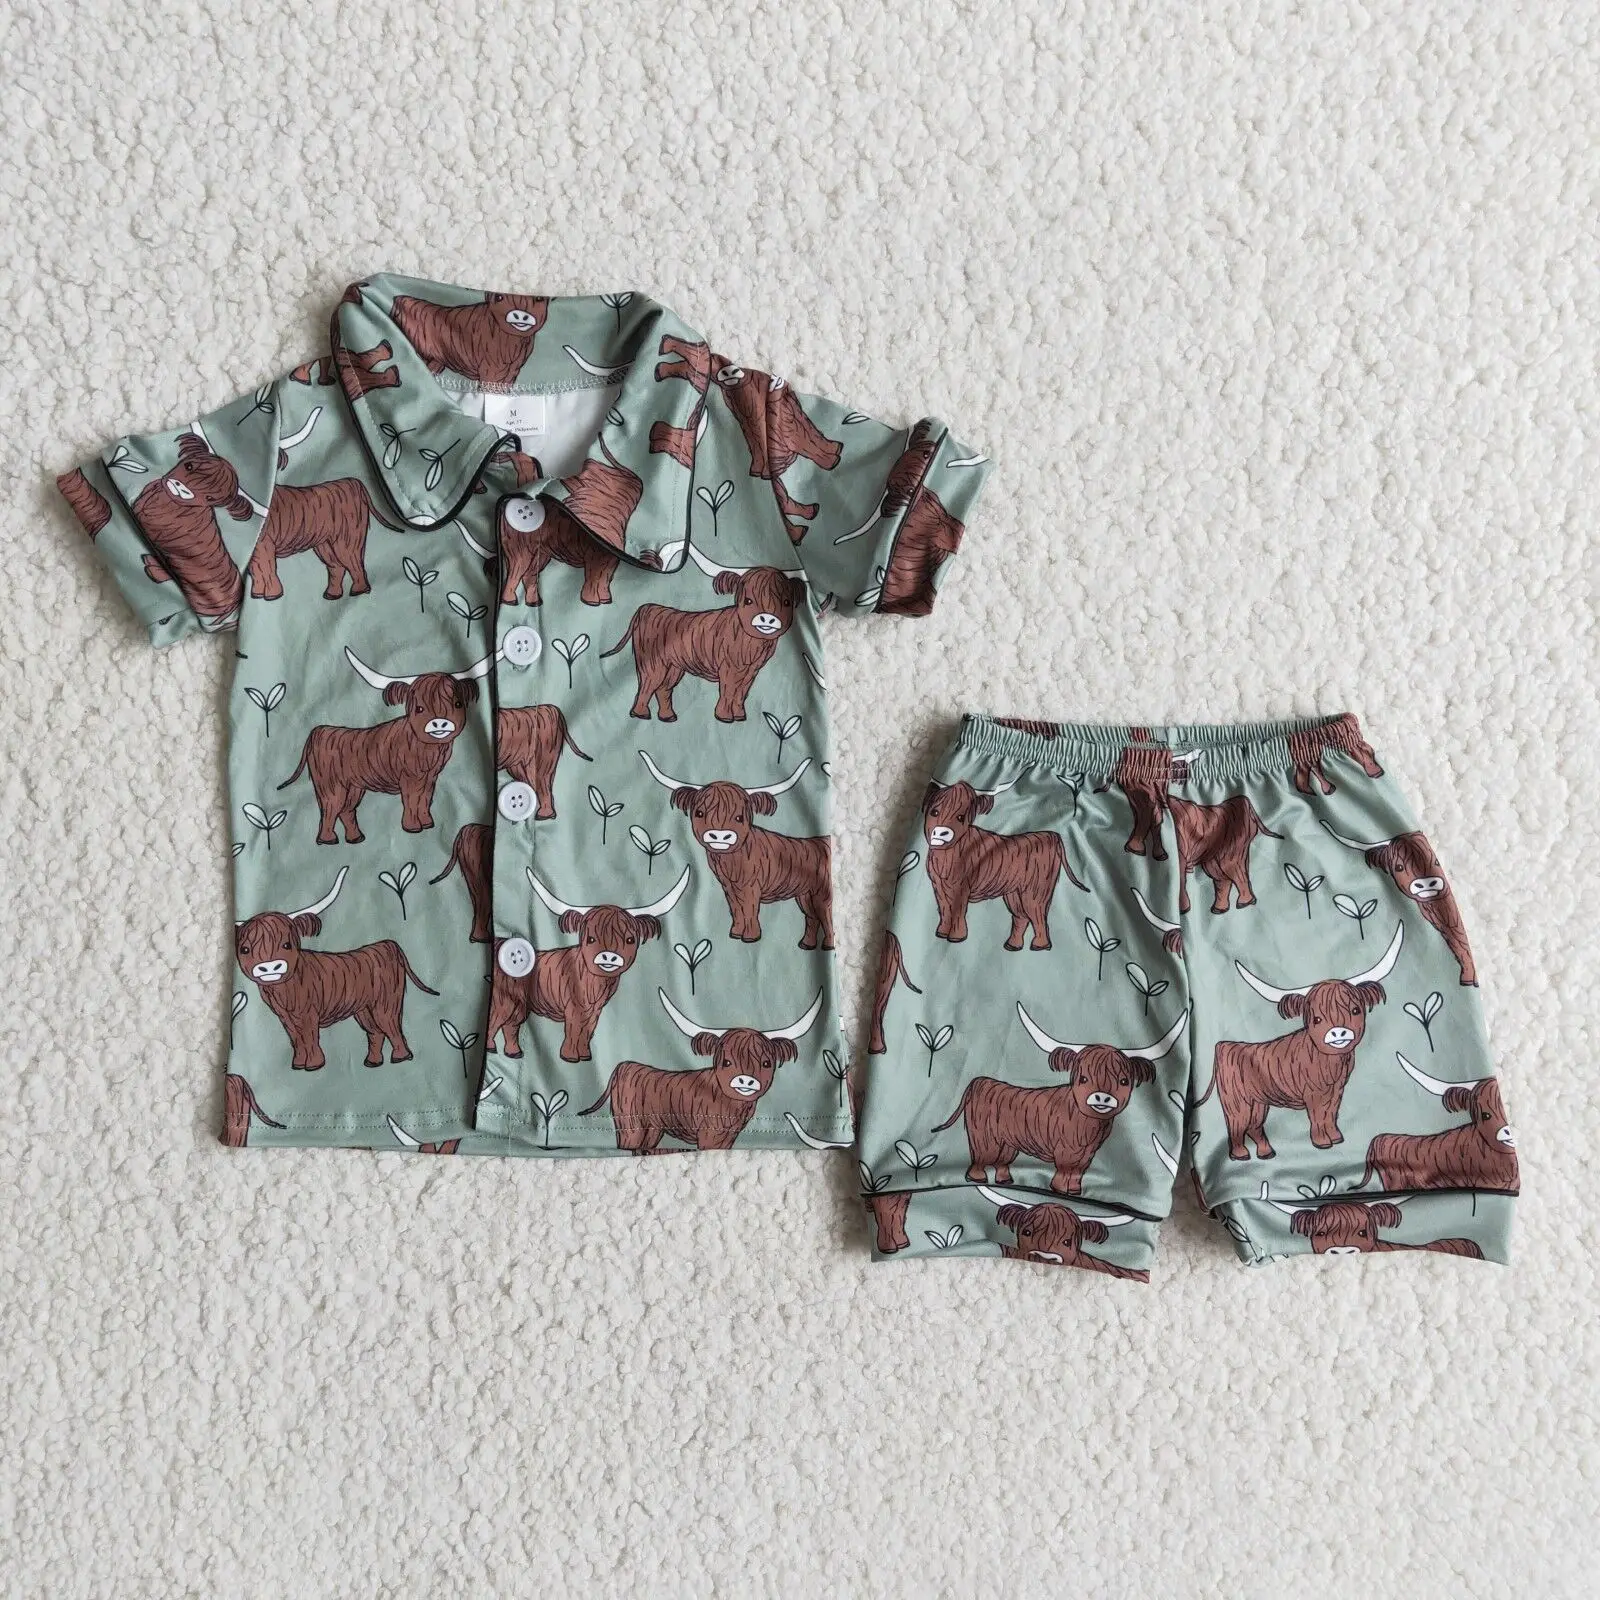 

RTS Baby Boys Clothes Camo Cow Yak Short Sleeves Summer Shorts Children Boutique Western Outfits Clothing Sets